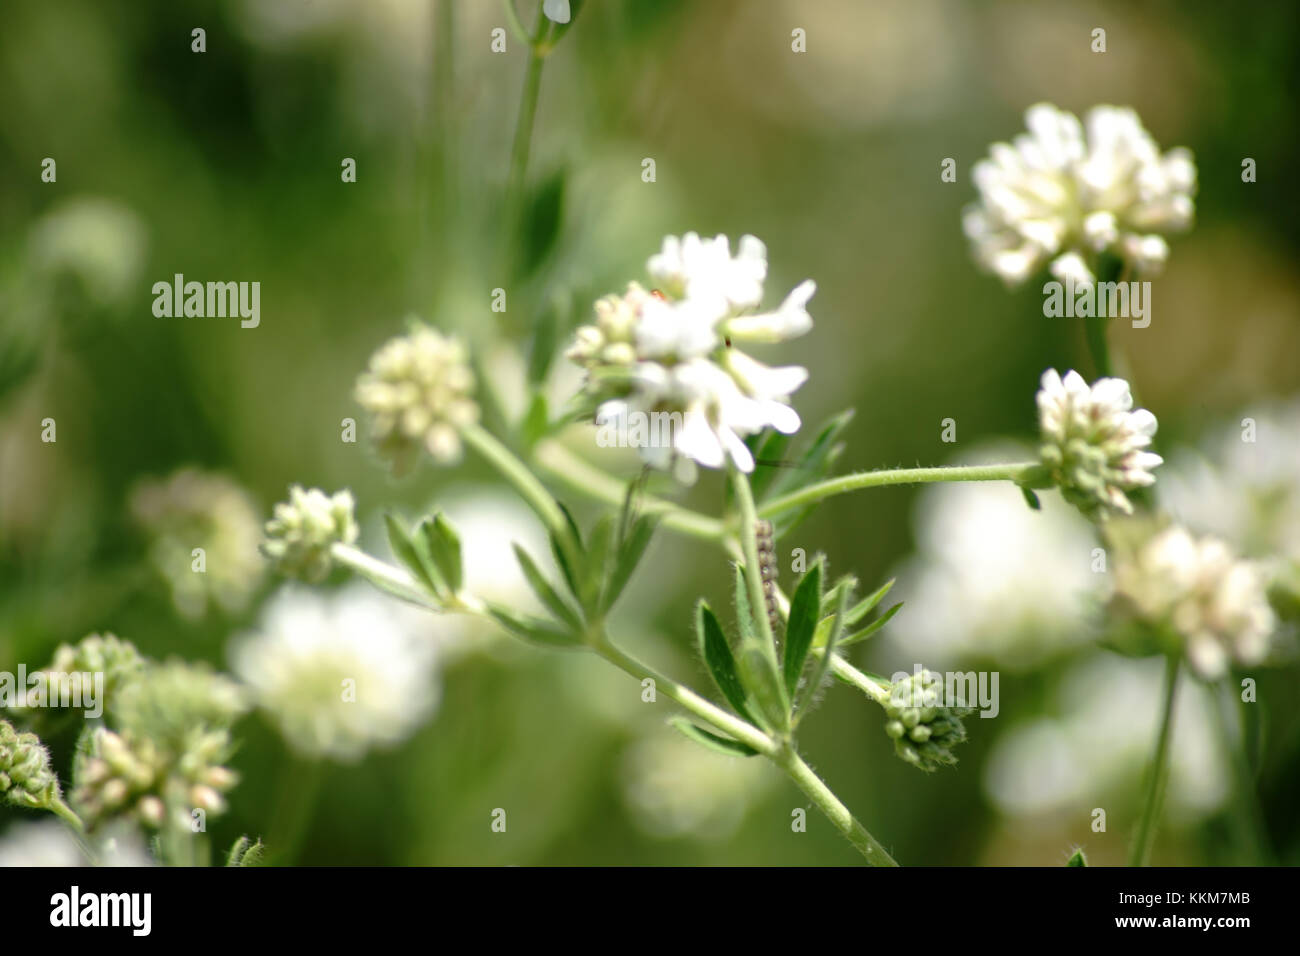 The close-up of the flower umbels from dorycnium. Stock Photo